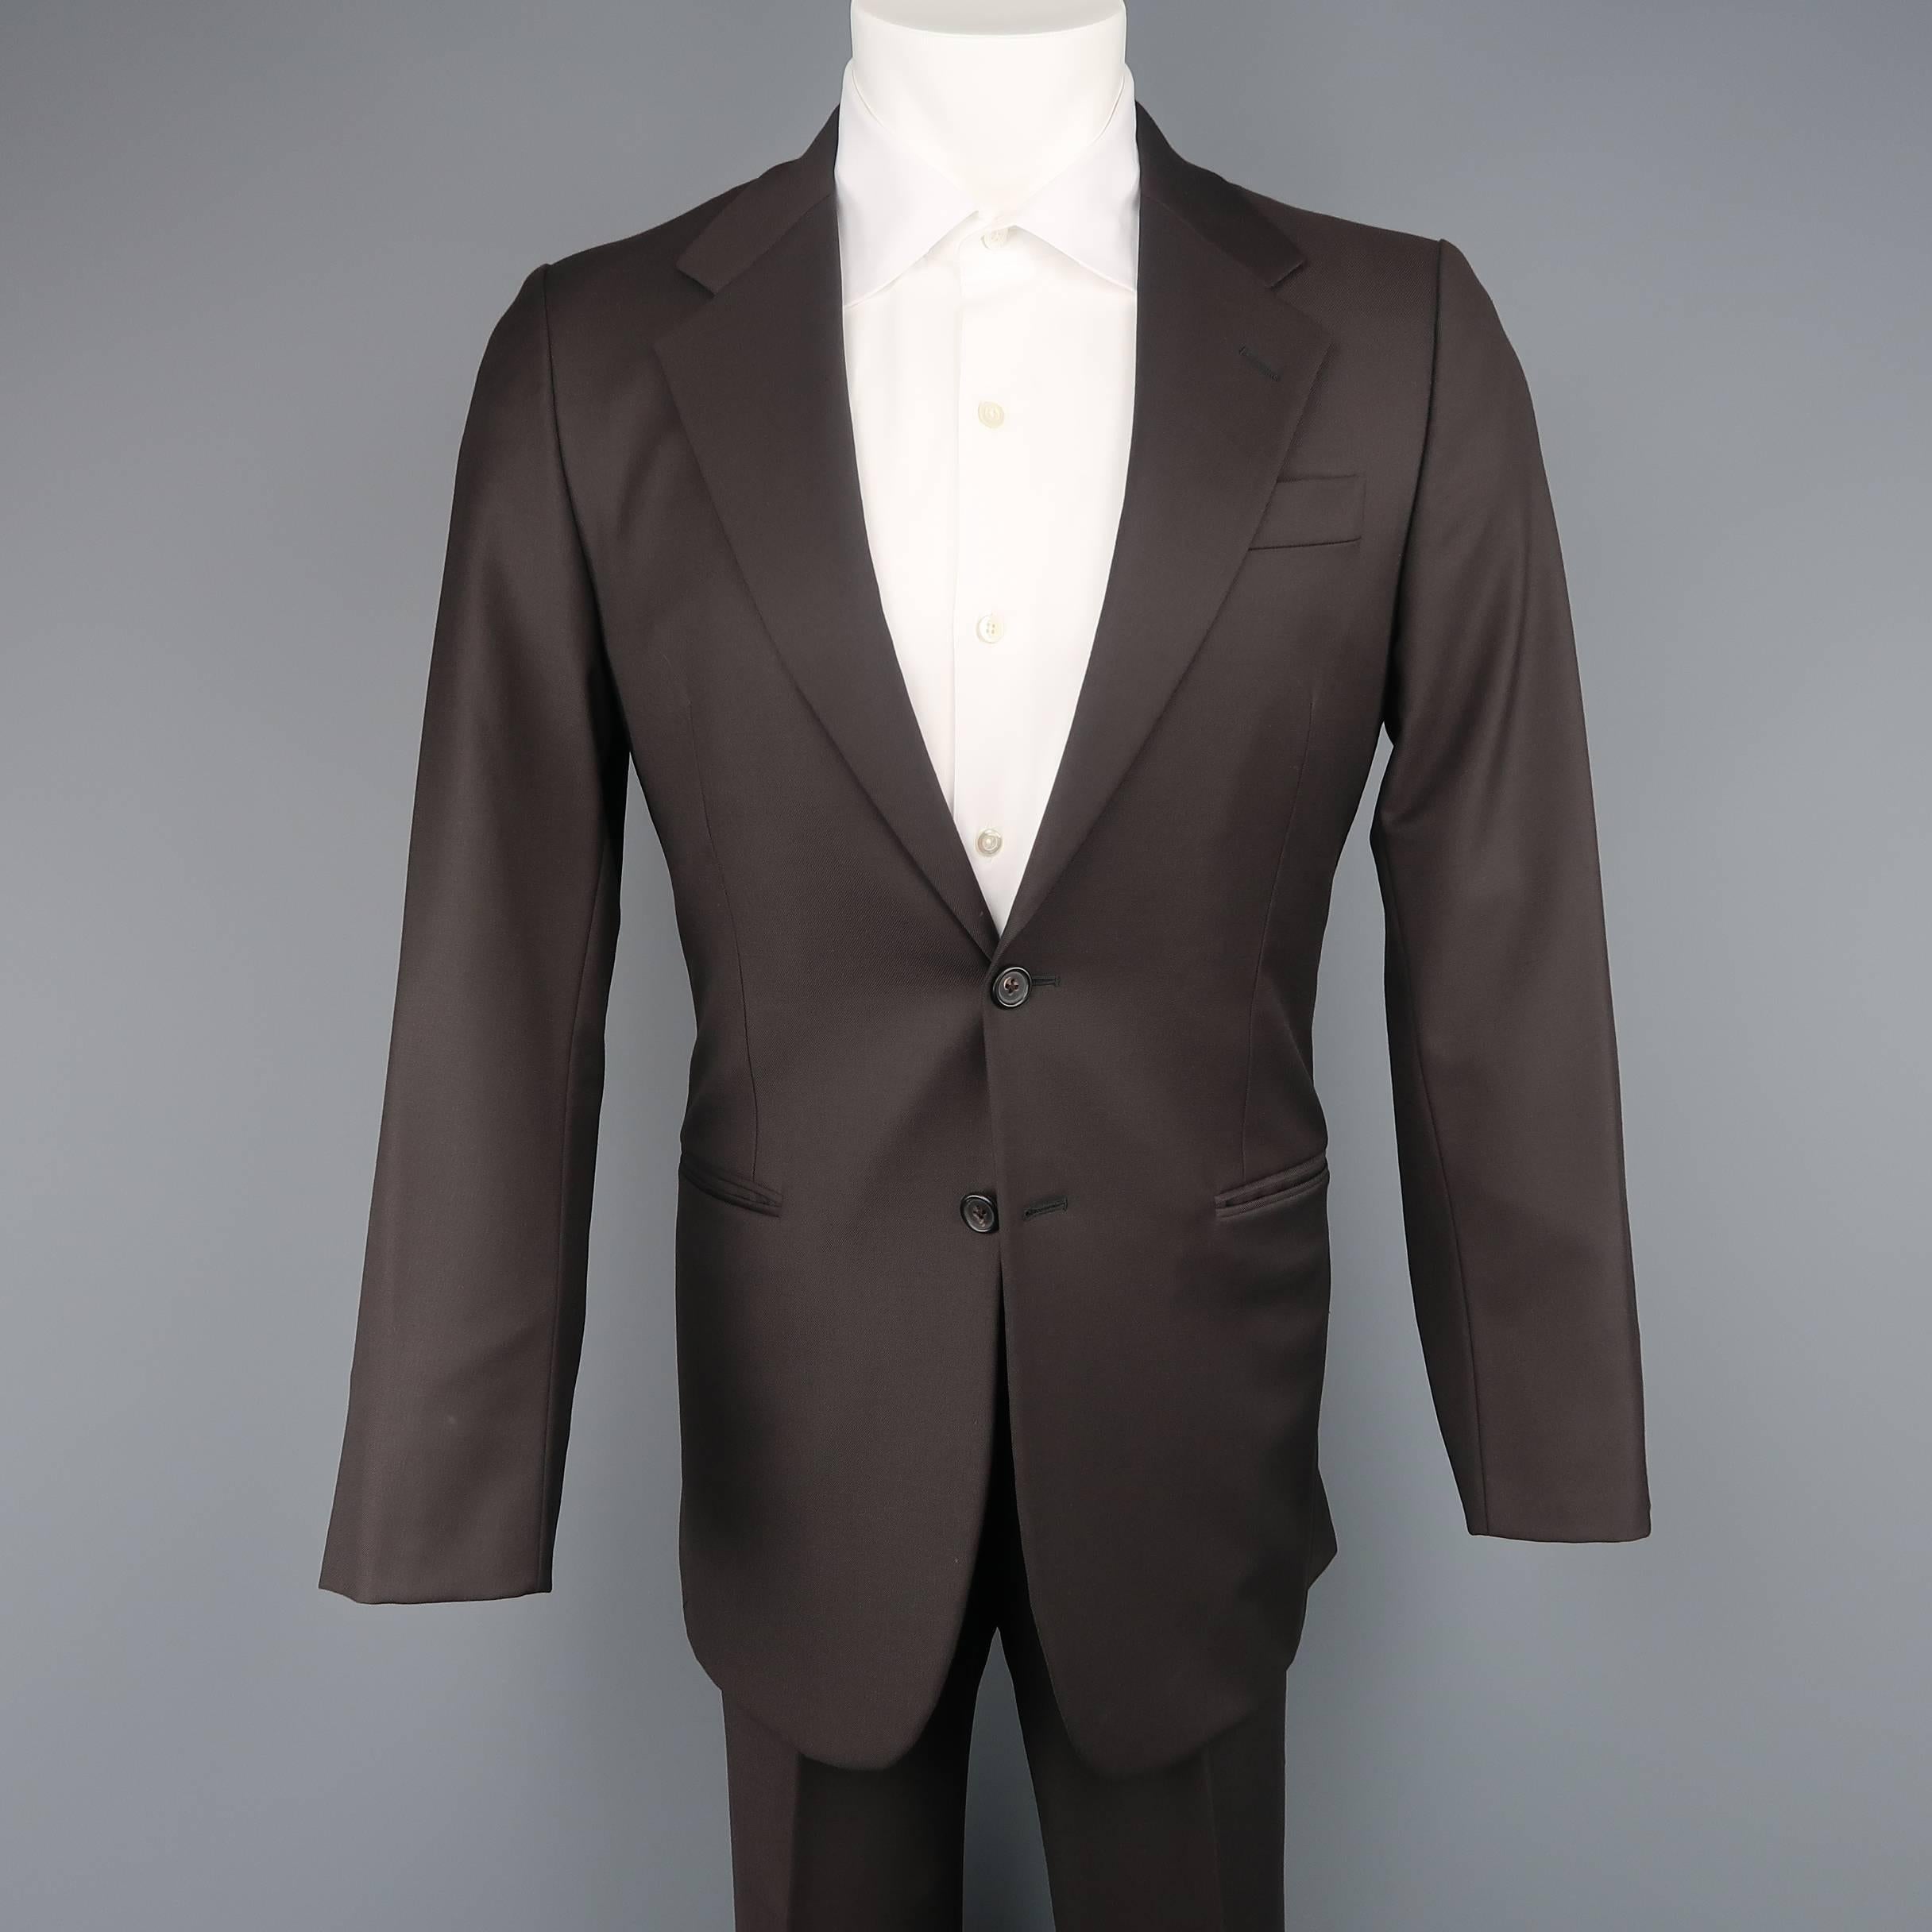 Two piece PRADA suit comes in brown wool twill and includes a single breasted, two button sport coat with notch lapel and matching flat front pants. Made in Italy.
 
Excellent Pre-Owned Condition.
Marked: IT 48 R
 
Measurements:
 
Jacket
Shoulder: